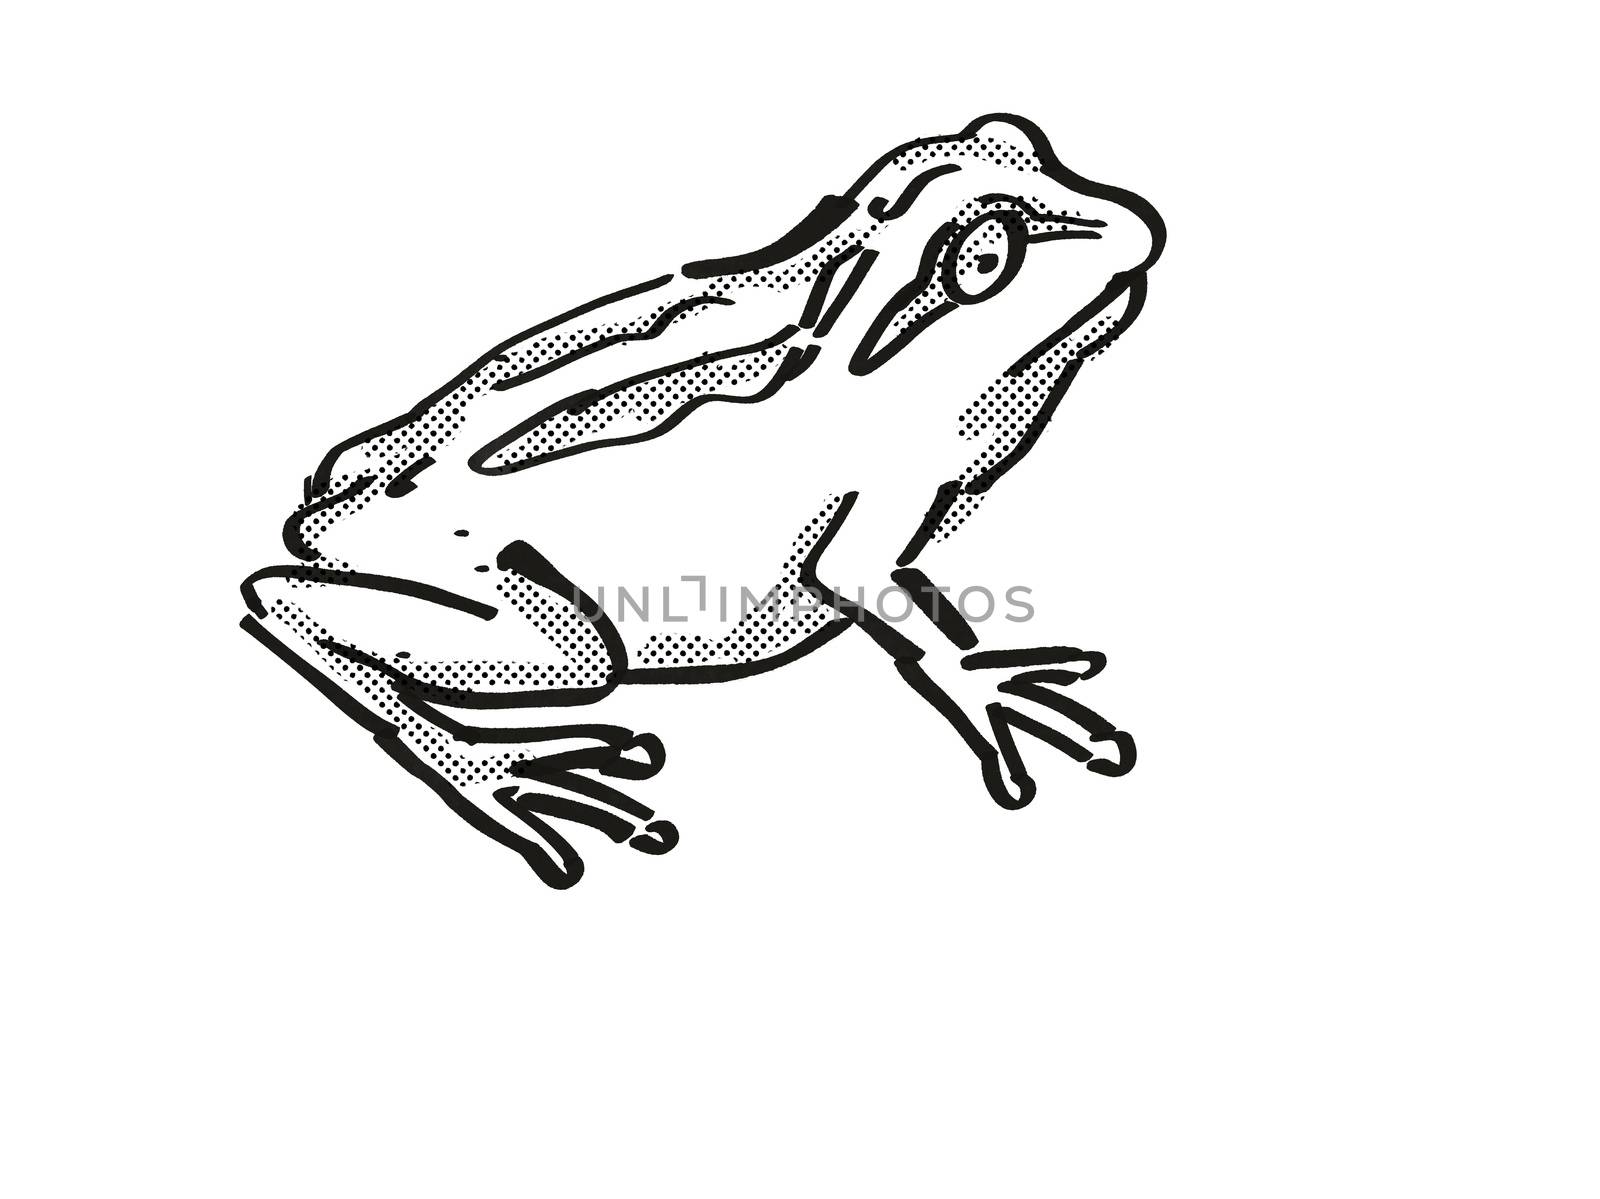 Retro cartoon style drawing of a Whistling Tree Frog , a native New Zealand wildlife on isolated white background done in black and white